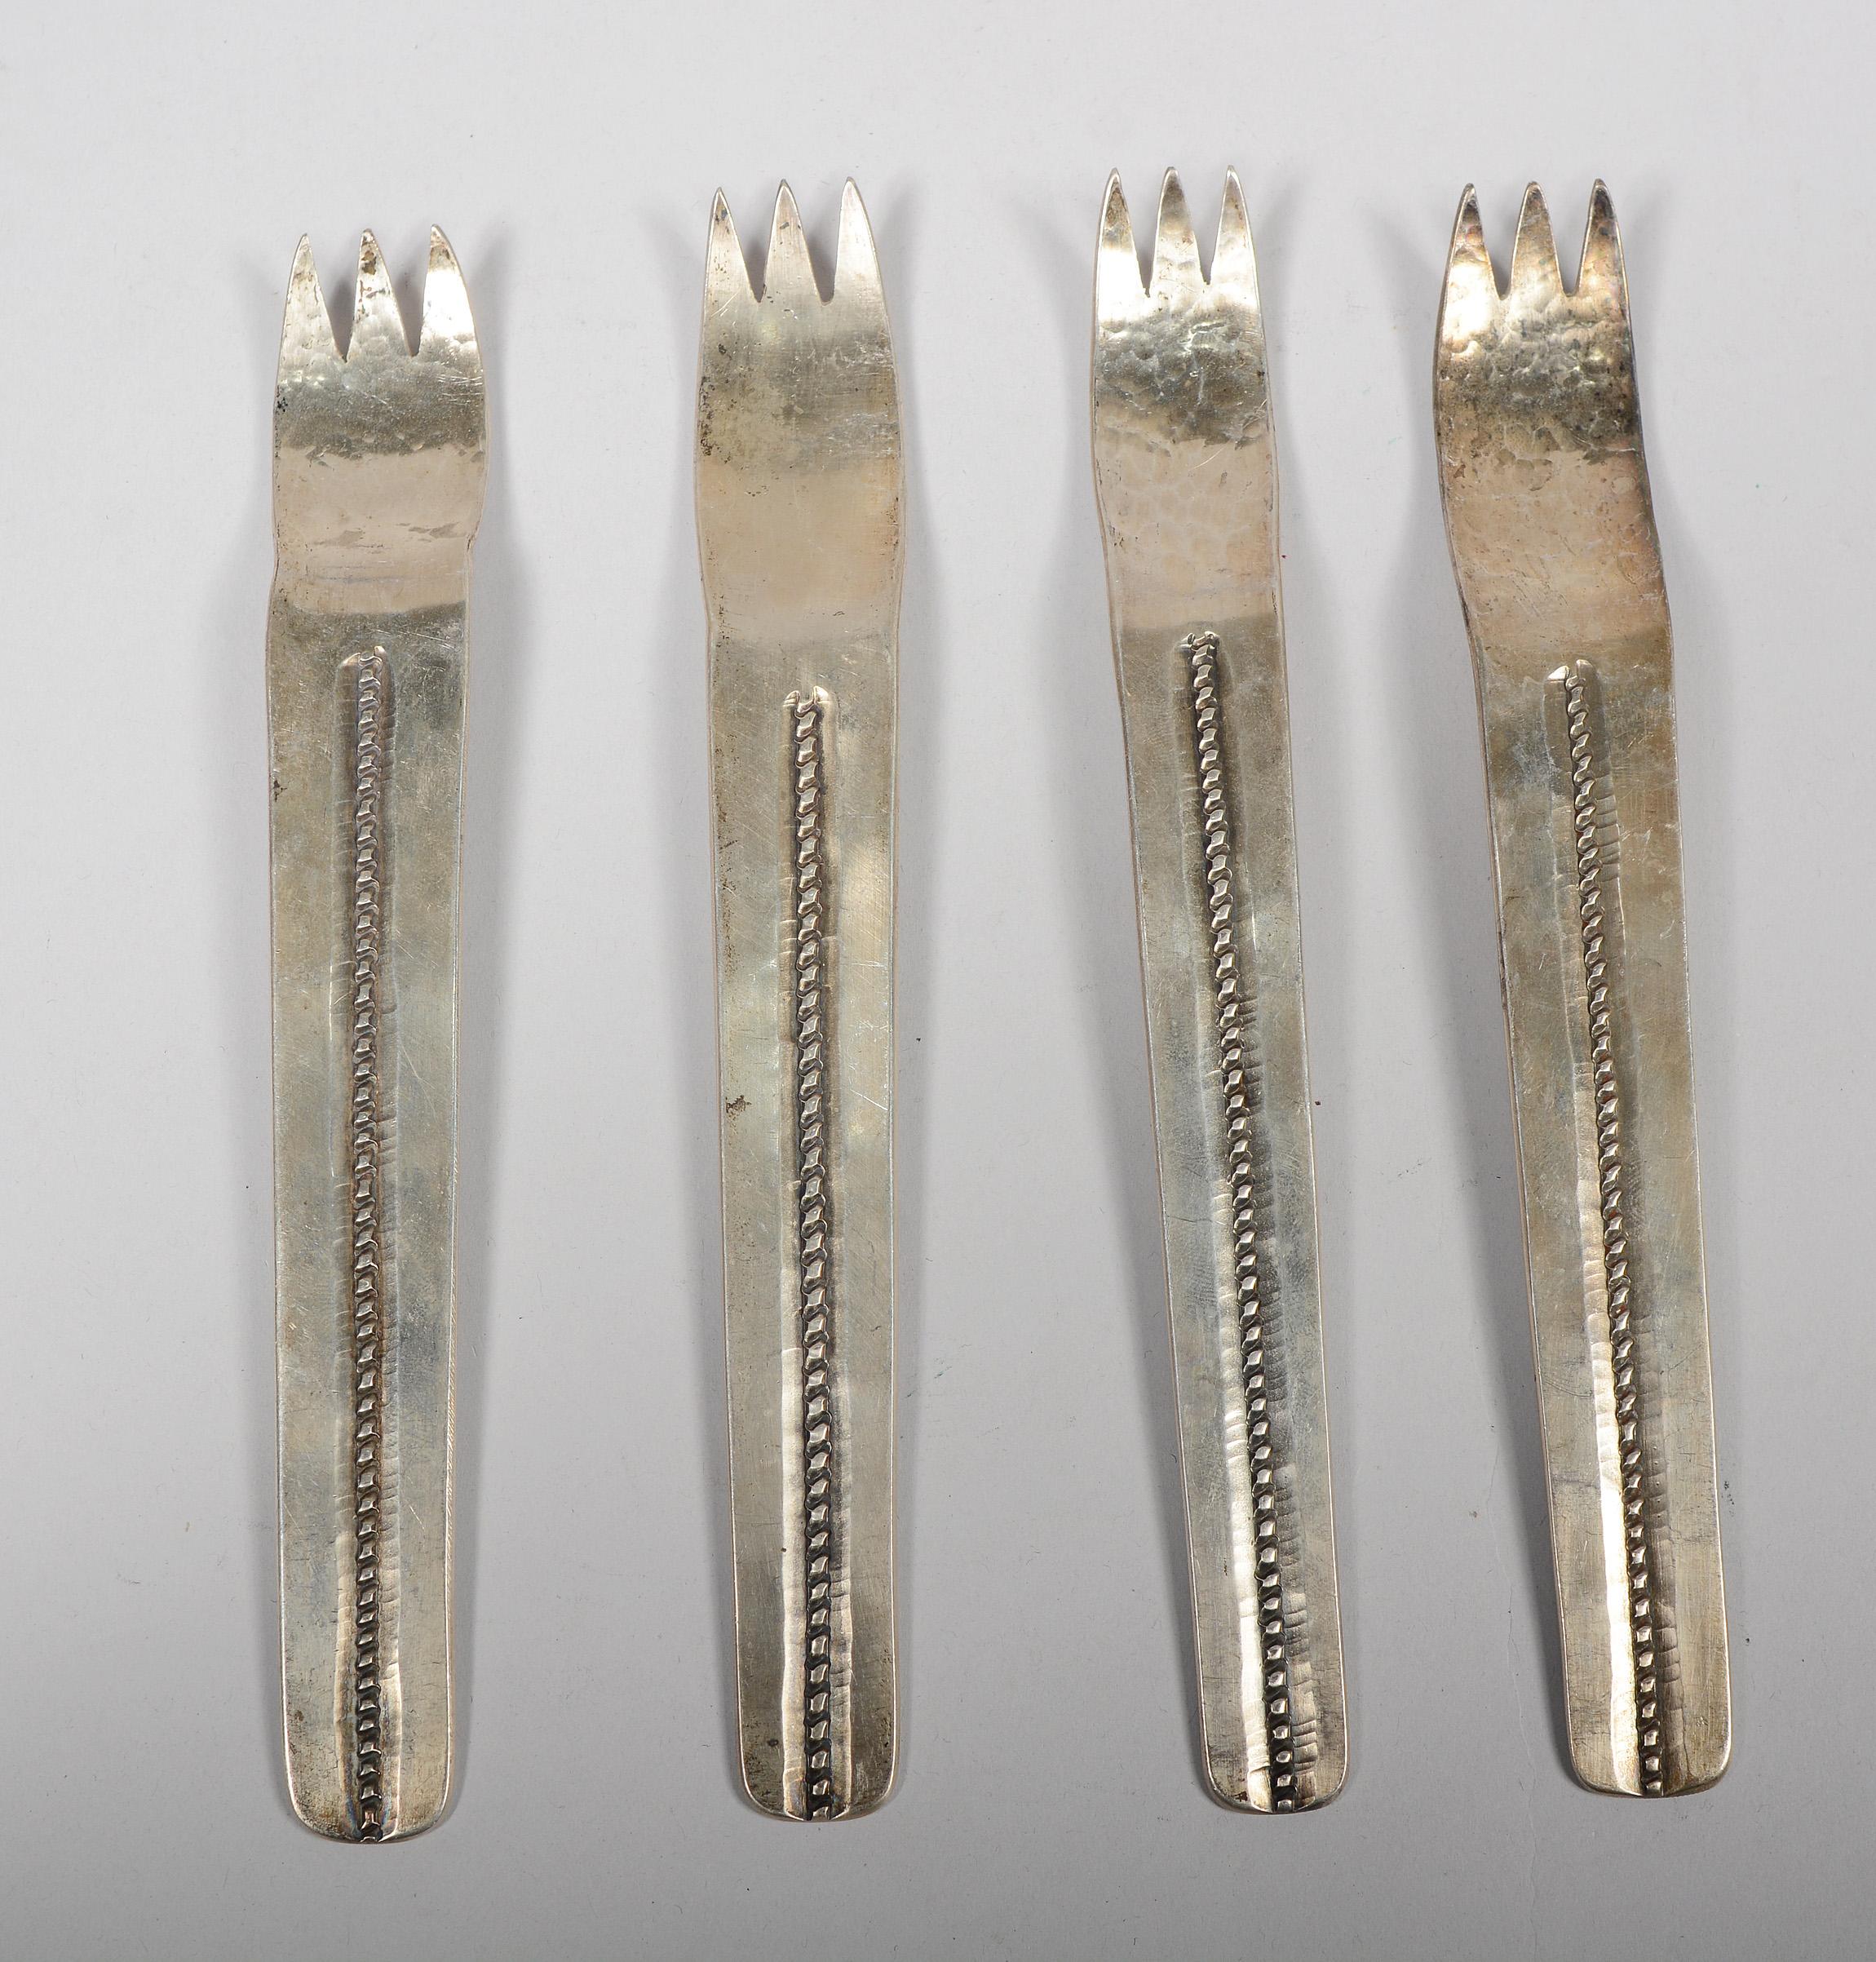 Handmade modernist silver flatware set by a Navajo artist. The pieces are signed but we have been unable to determine the maker. This set includes four three piece place settings and a serving spoon and fork. The forks and spoons have variances in